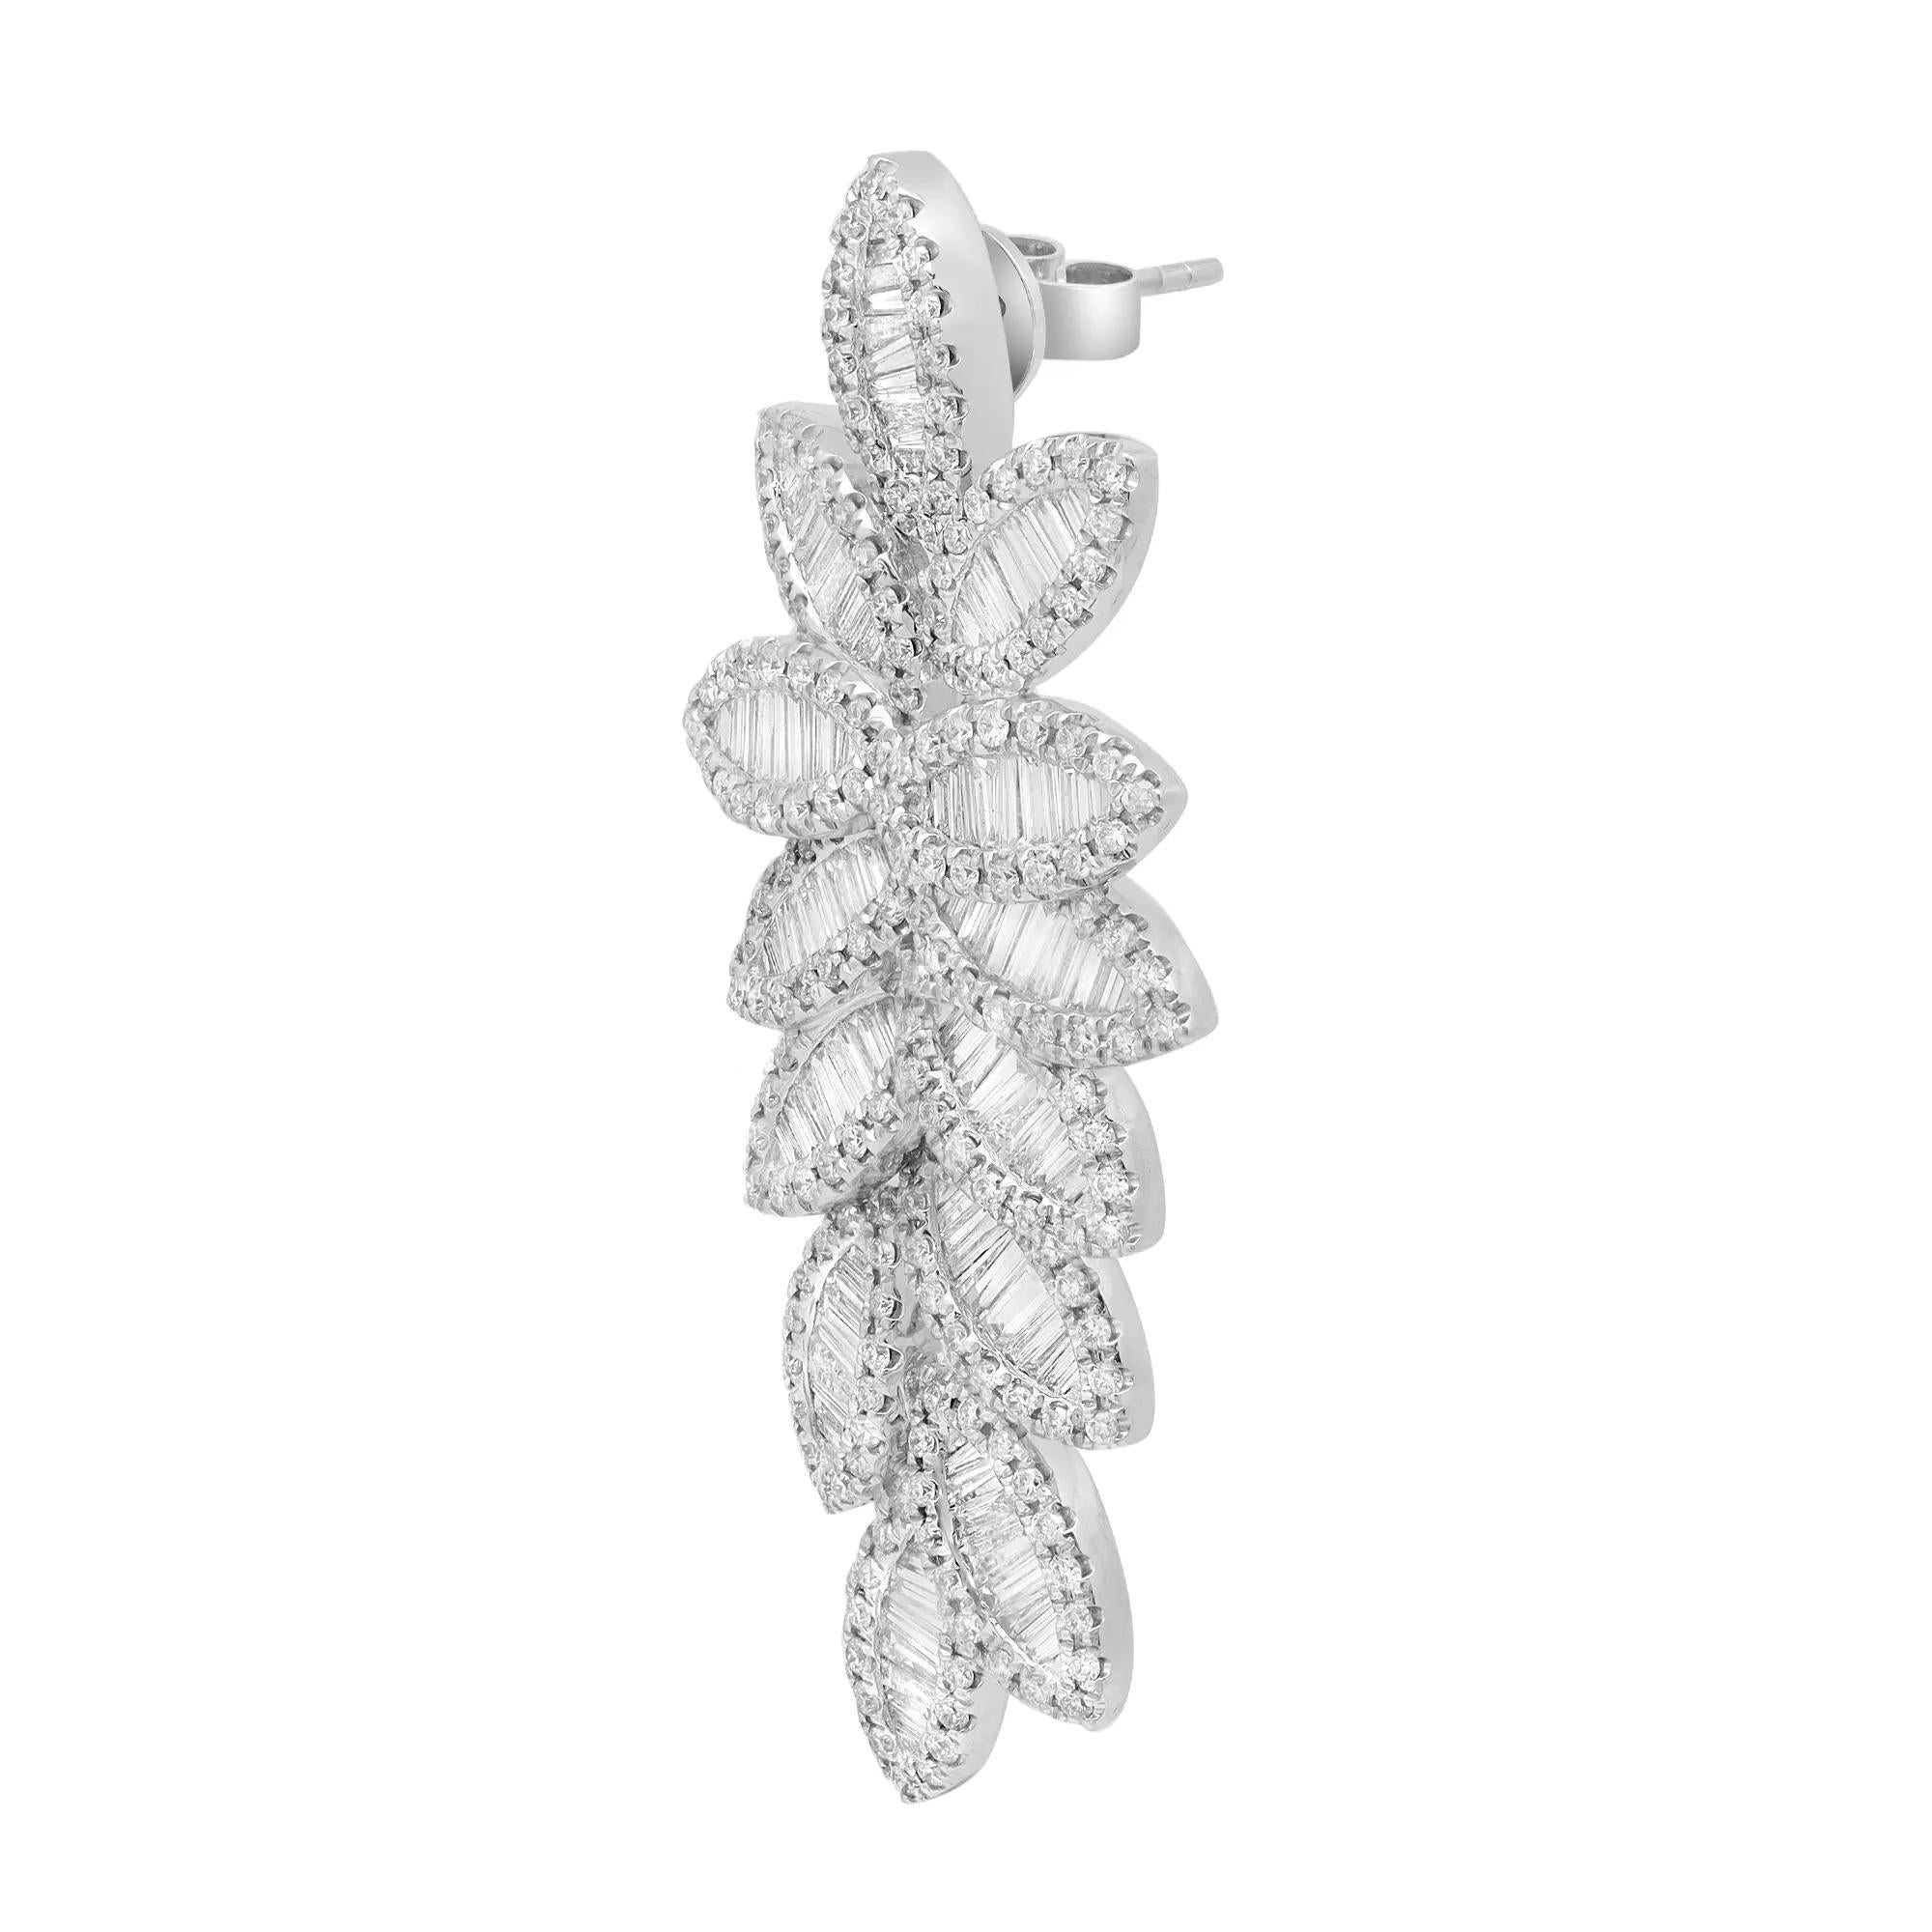 Shimmering diamonds sway along these stunning 18K white gold women's drop earrings. These earrings feature channel set baguette cut dazzling diamonds encrusted in multiple leaves shanks with round brilliant cut diamond outline. Total diamond weight: